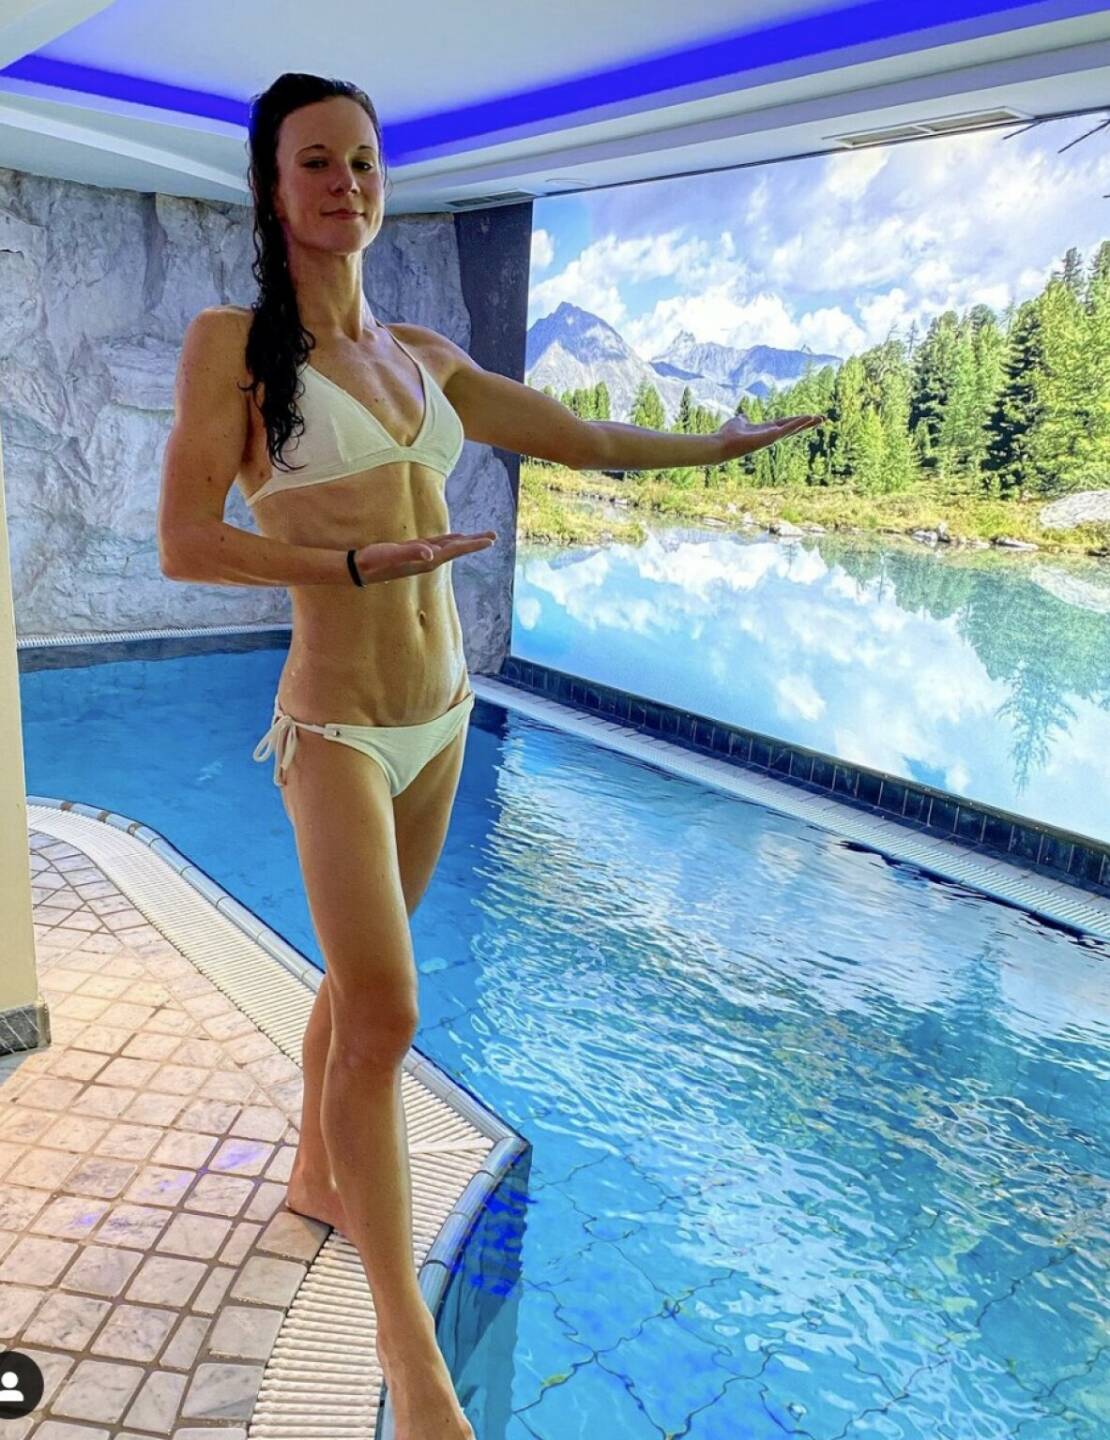 Tanja Stroschneider Bad Relax
Yep, that Spa of @hotelsonneischgl would have been nice after today‘s run-swim-bike-gym day. 😅 🧖🏻‍♀️ Busy day for me today but I loved every second of it as I feel totally obsessed with work and that process atm. ❤️ 
Anyway… can’t wait to be back in Ischgl soon and if you want to come with us, we still got some free spots for our training week in Ischgl from 28.8.-4.9. ! So if you‘re interested just contact us via email: office@team2012.at 😊
PS: don’t be afraid, also beginners are welcome. 🤗 
#ischgl #relax #hotelsonneischgl #mountains #trailrunning #triathlontraining #run #running #spa #training
Von: https://www.instagram.com/tstroschneidertri// (Tanja Stroschneider. Triathletin https://youtu.be/8mBNx4YvAeI  http://www.sportgeschichte.at) 